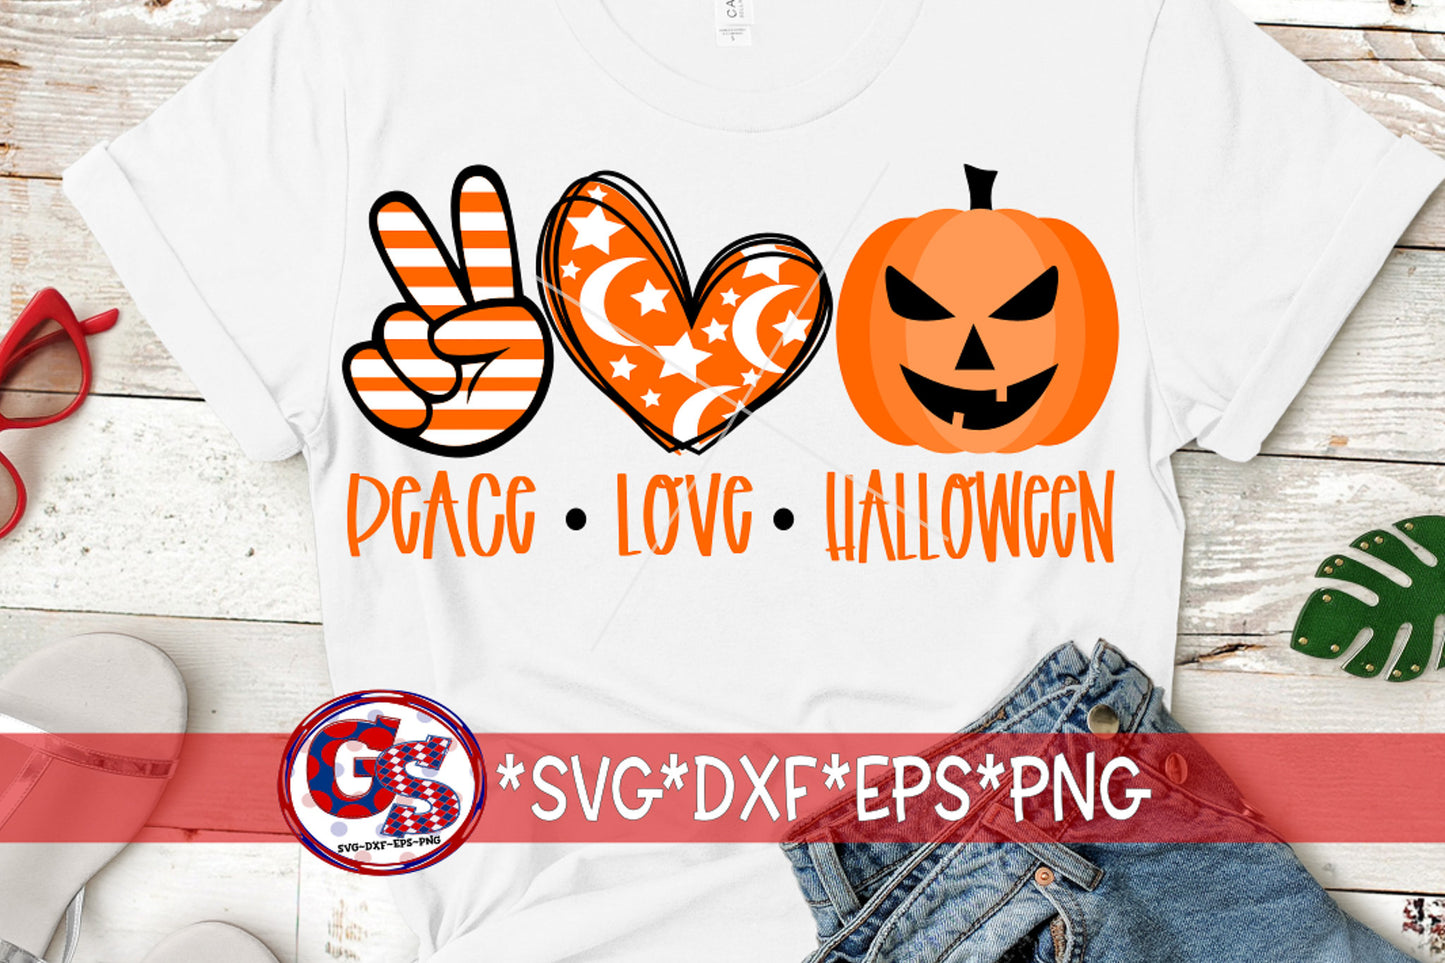 Peace Love Halloween svg dxf eps png. Peace Love Halloween SvG | Halloween SvG | Pumpkin DxF | Halloween DxF | Instant Download Cut File